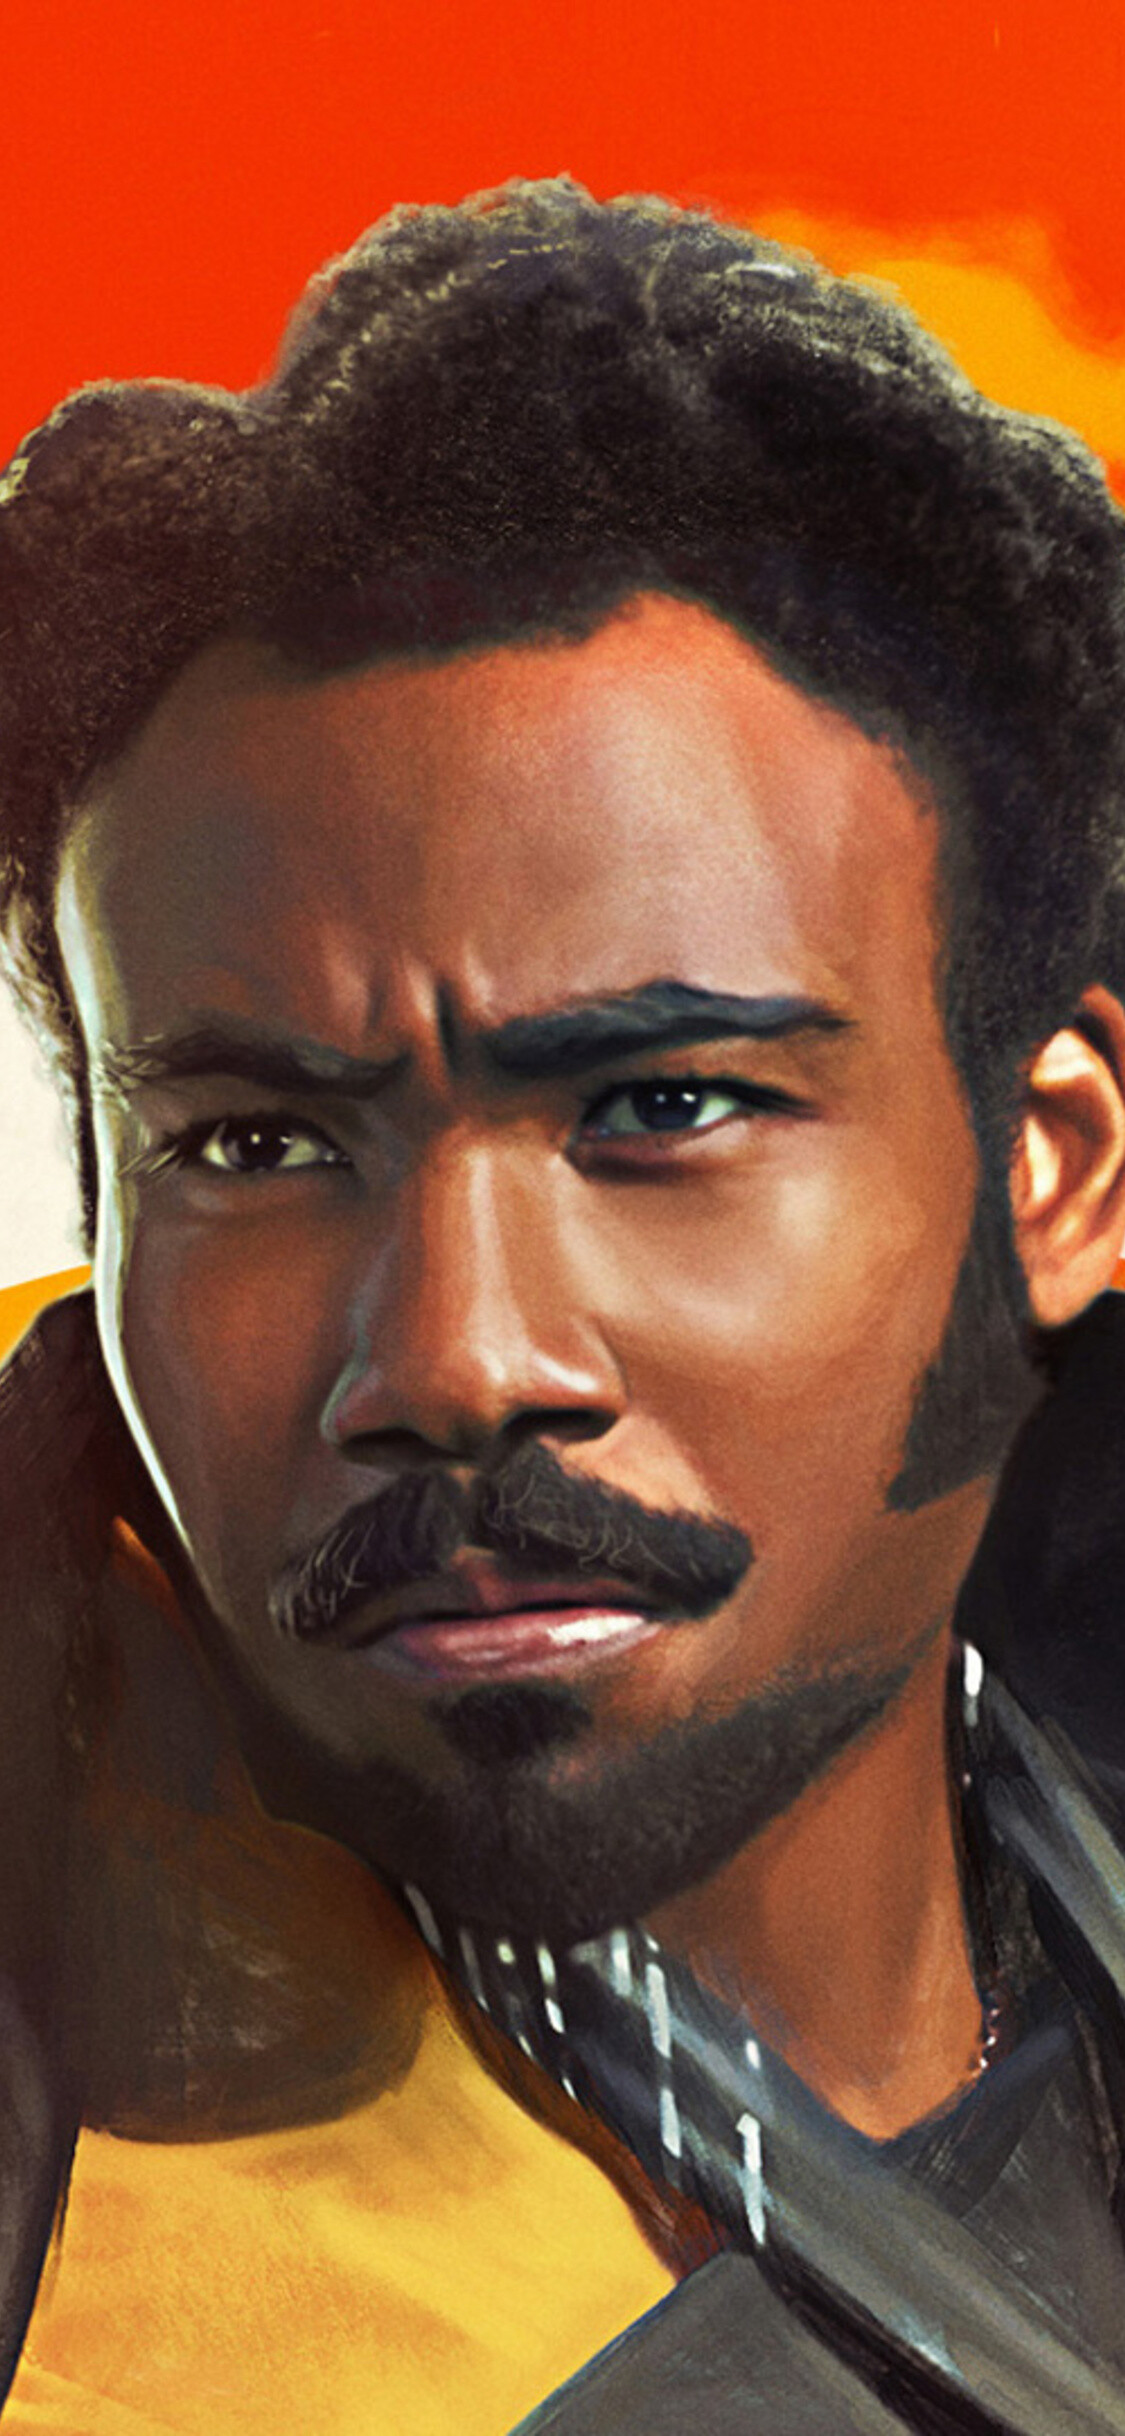 Donald Glover: Lando Calrissian, was the owner of the Millennium Falcon until losing the ship to Han in a bet. 1130x2440 HD Wallpaper.